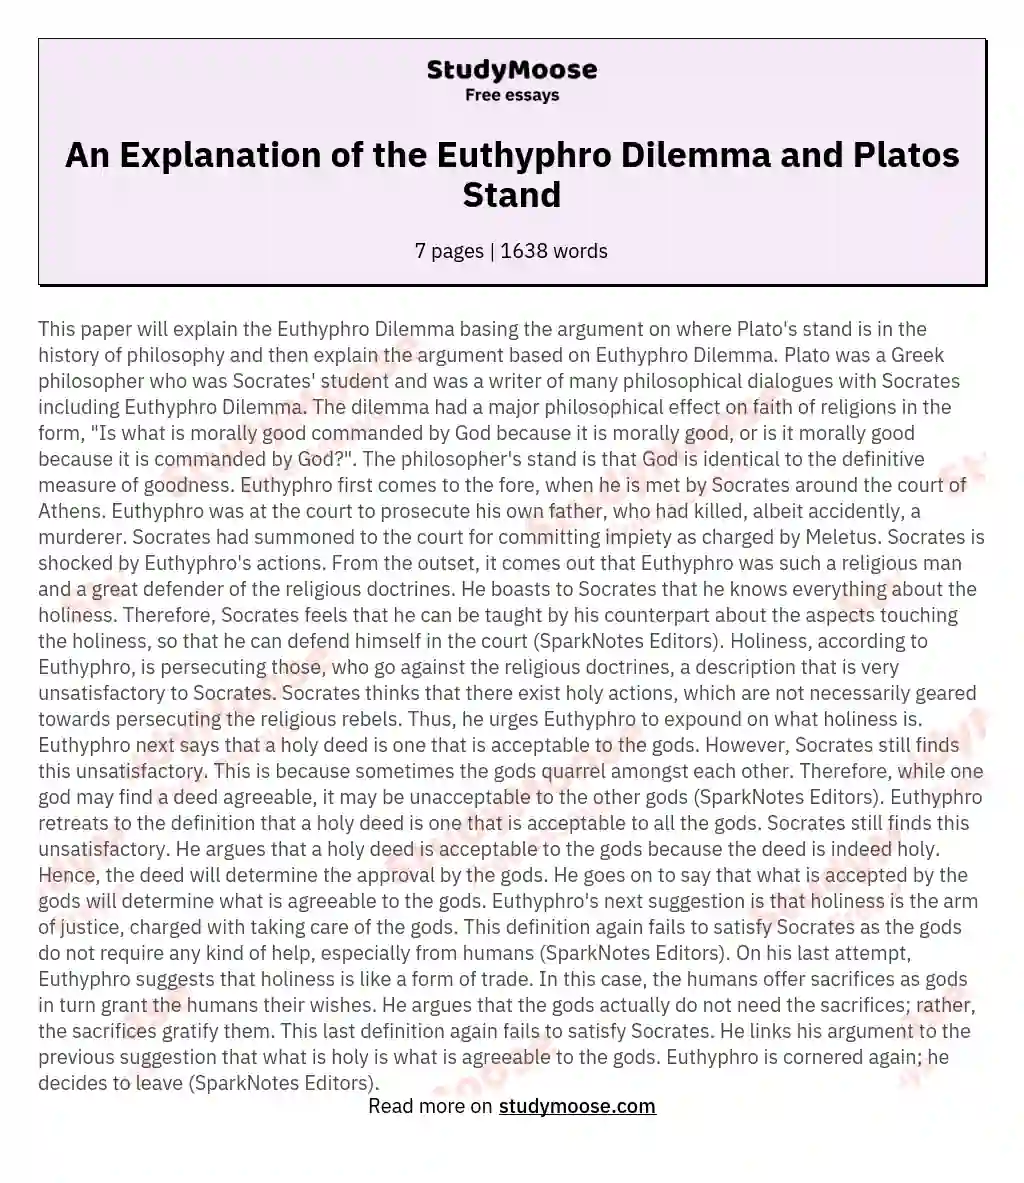 An Explanation of the Euthyphro Dilemma and Platos Stand essay